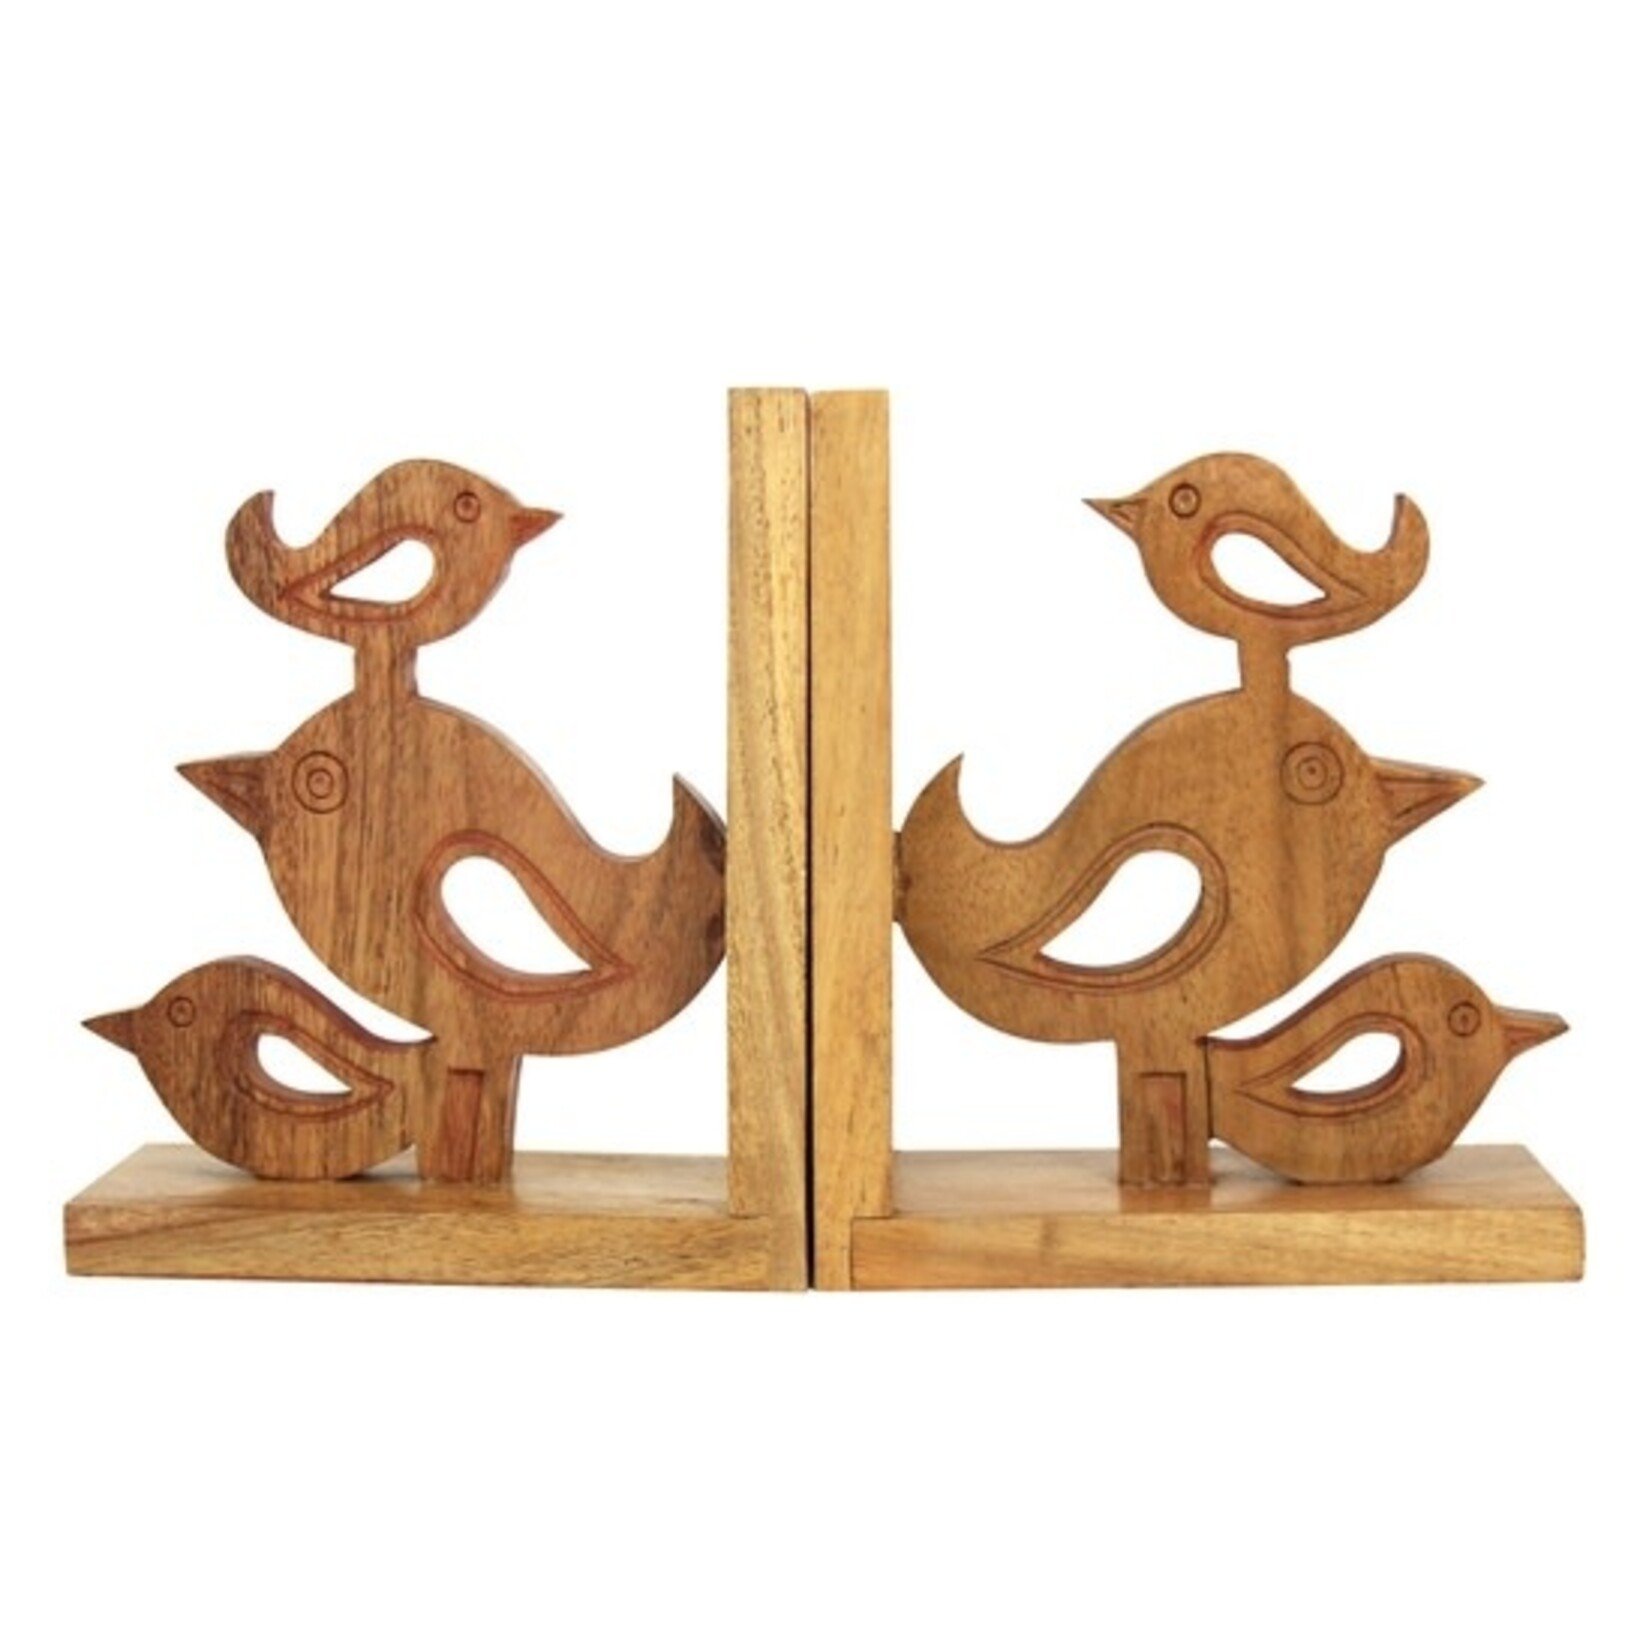 Global Crafts Handcarved Bird Bookends, India